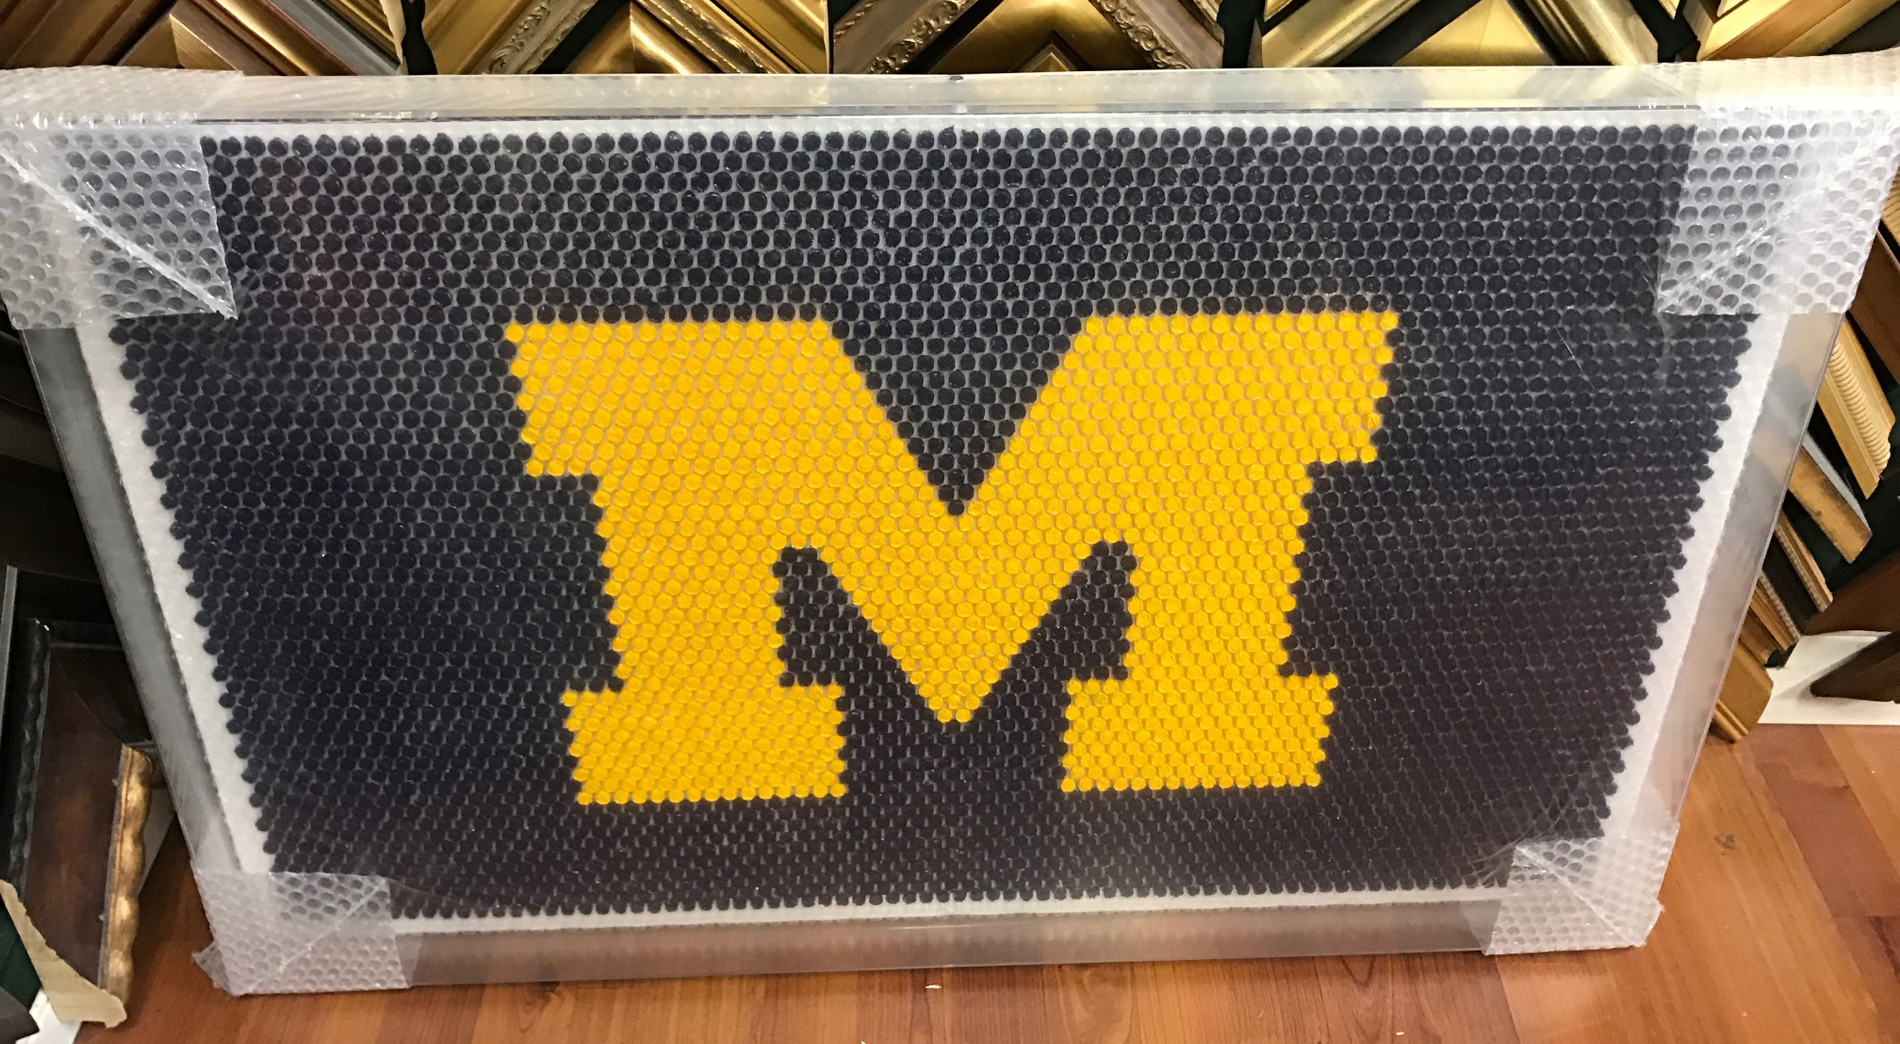 Go Blue! "M" - NYC Law Office